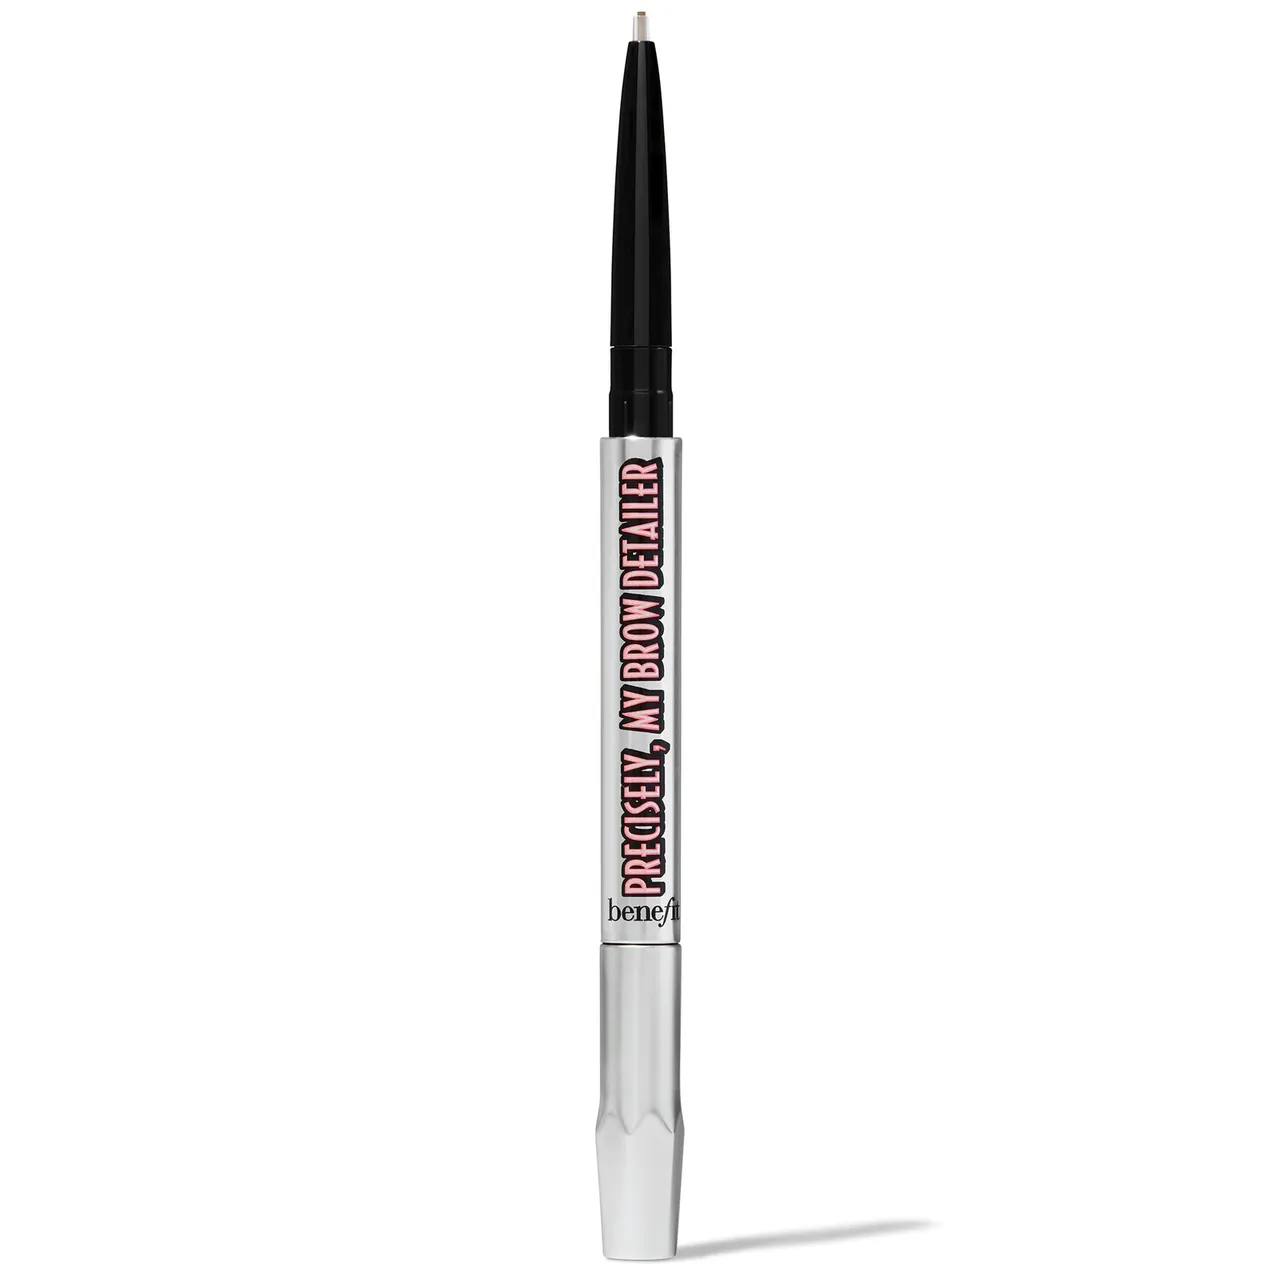 benefit Precisely My Brow Detailer Micro-Fine Precision Pencil 0.02g (Various Shades) - 2 Warm Golden Blonde